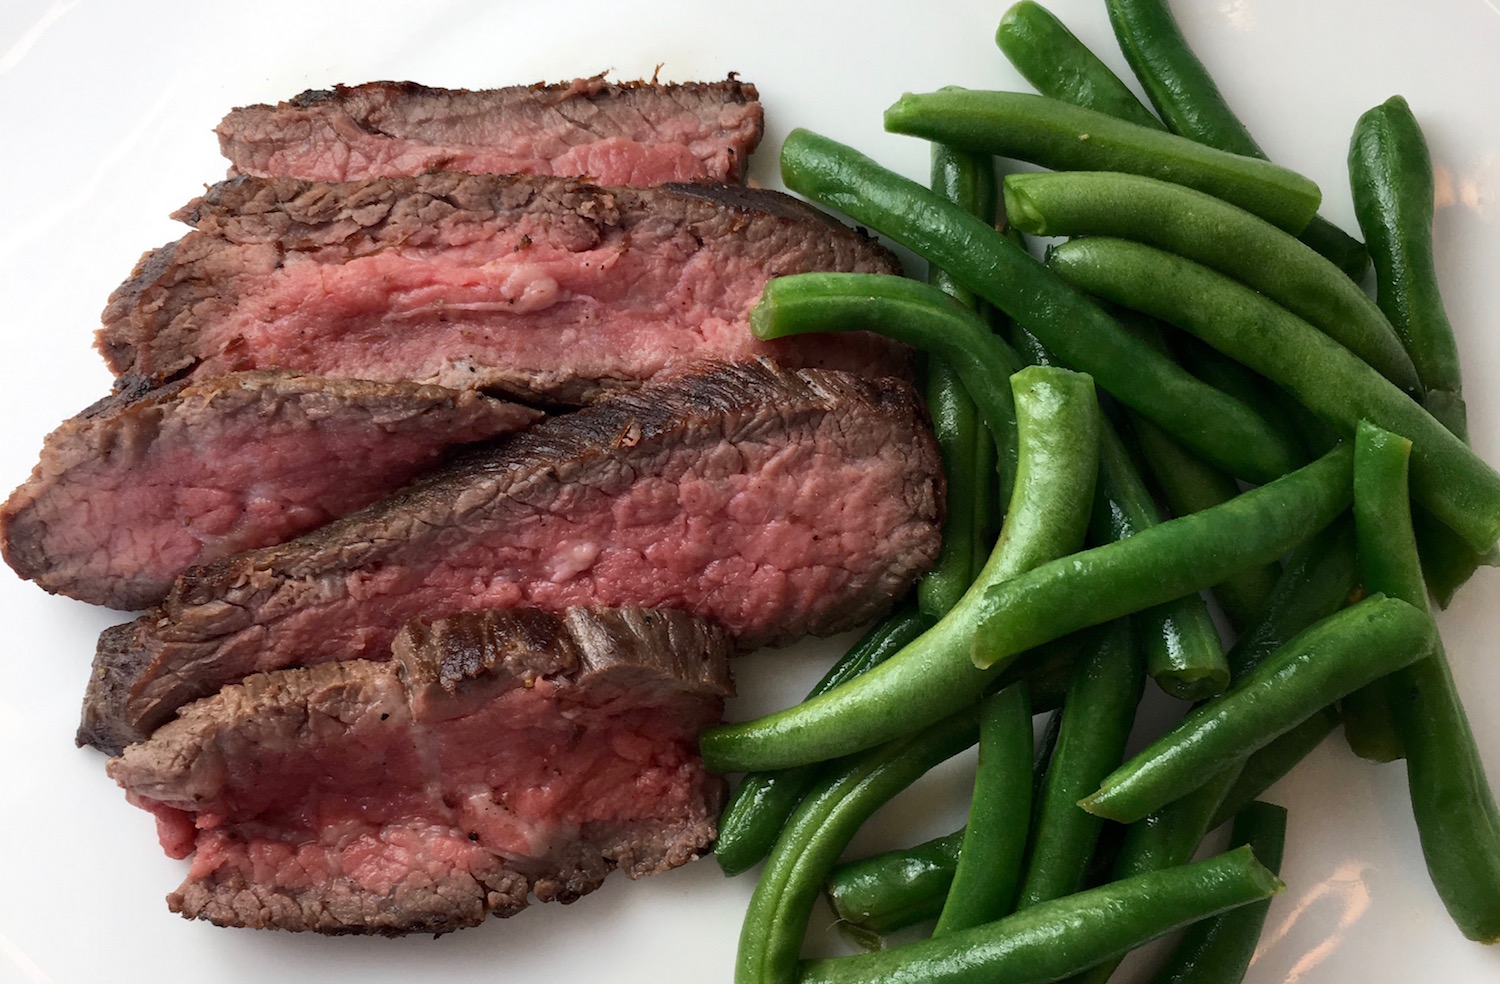 Quick and Easy Skillet Tri-Tip Steak